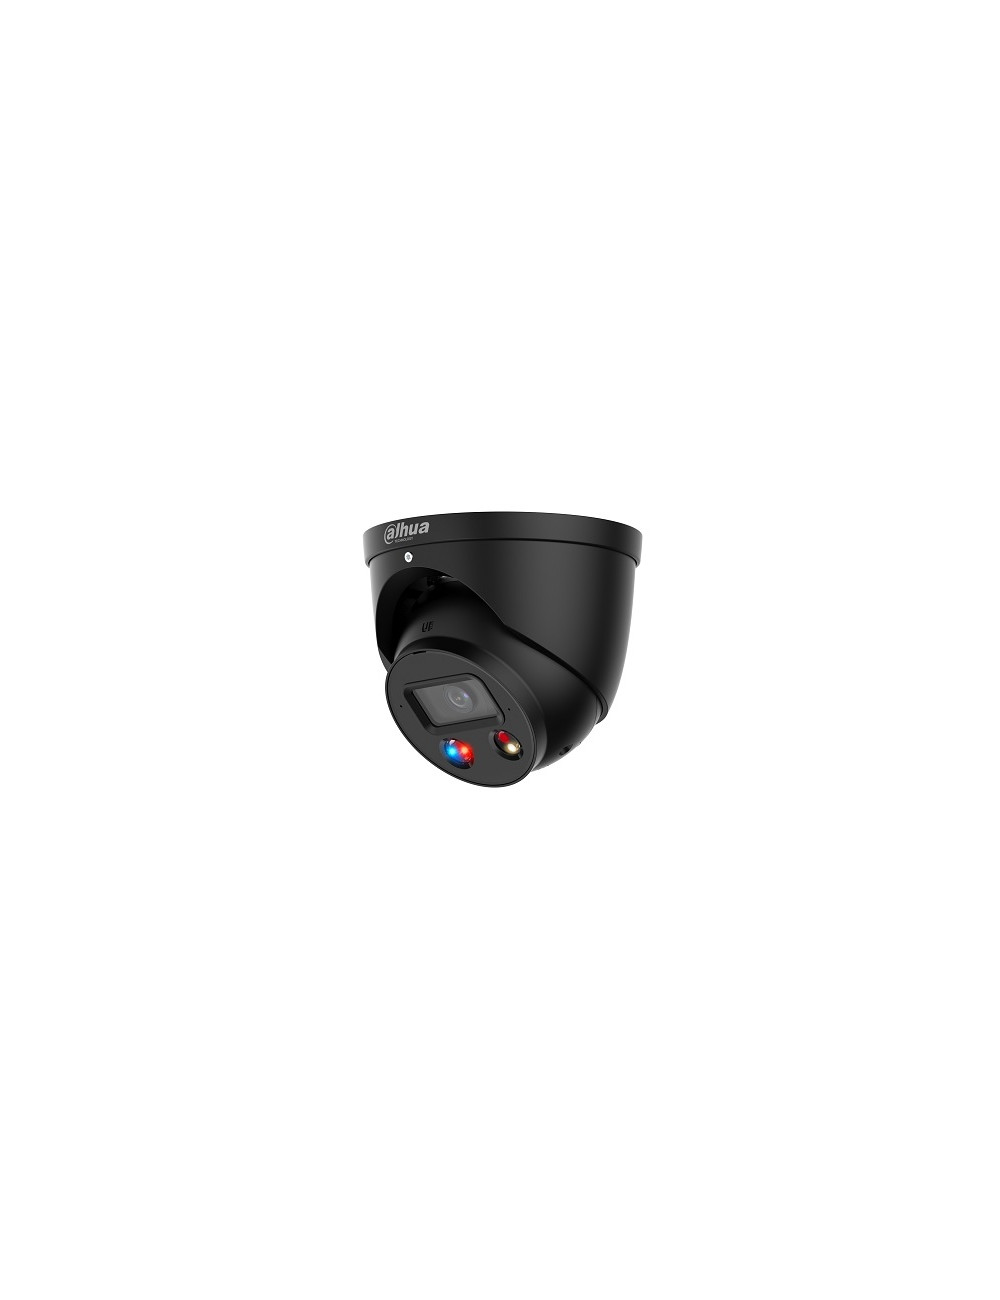 4K IP Network Camera 8MP HDW3849H-AS-PV-S4 2.8mm black